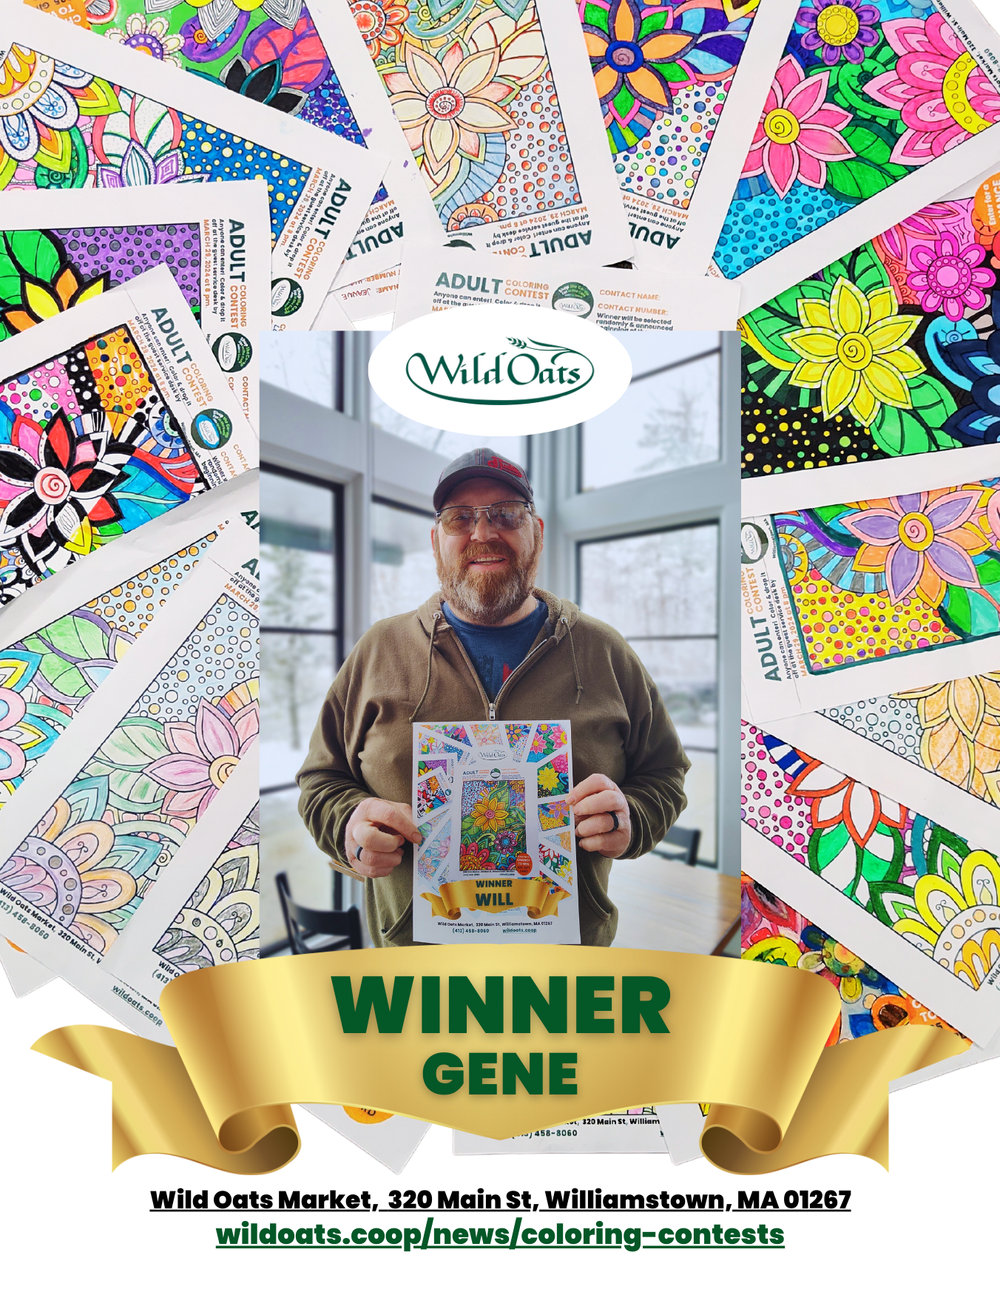 Congratulations Gene Gift Certficate Winner WILD OATS MARKET - MARCH 29TH 2024 at 8 pm Adult Coloring Contest.png